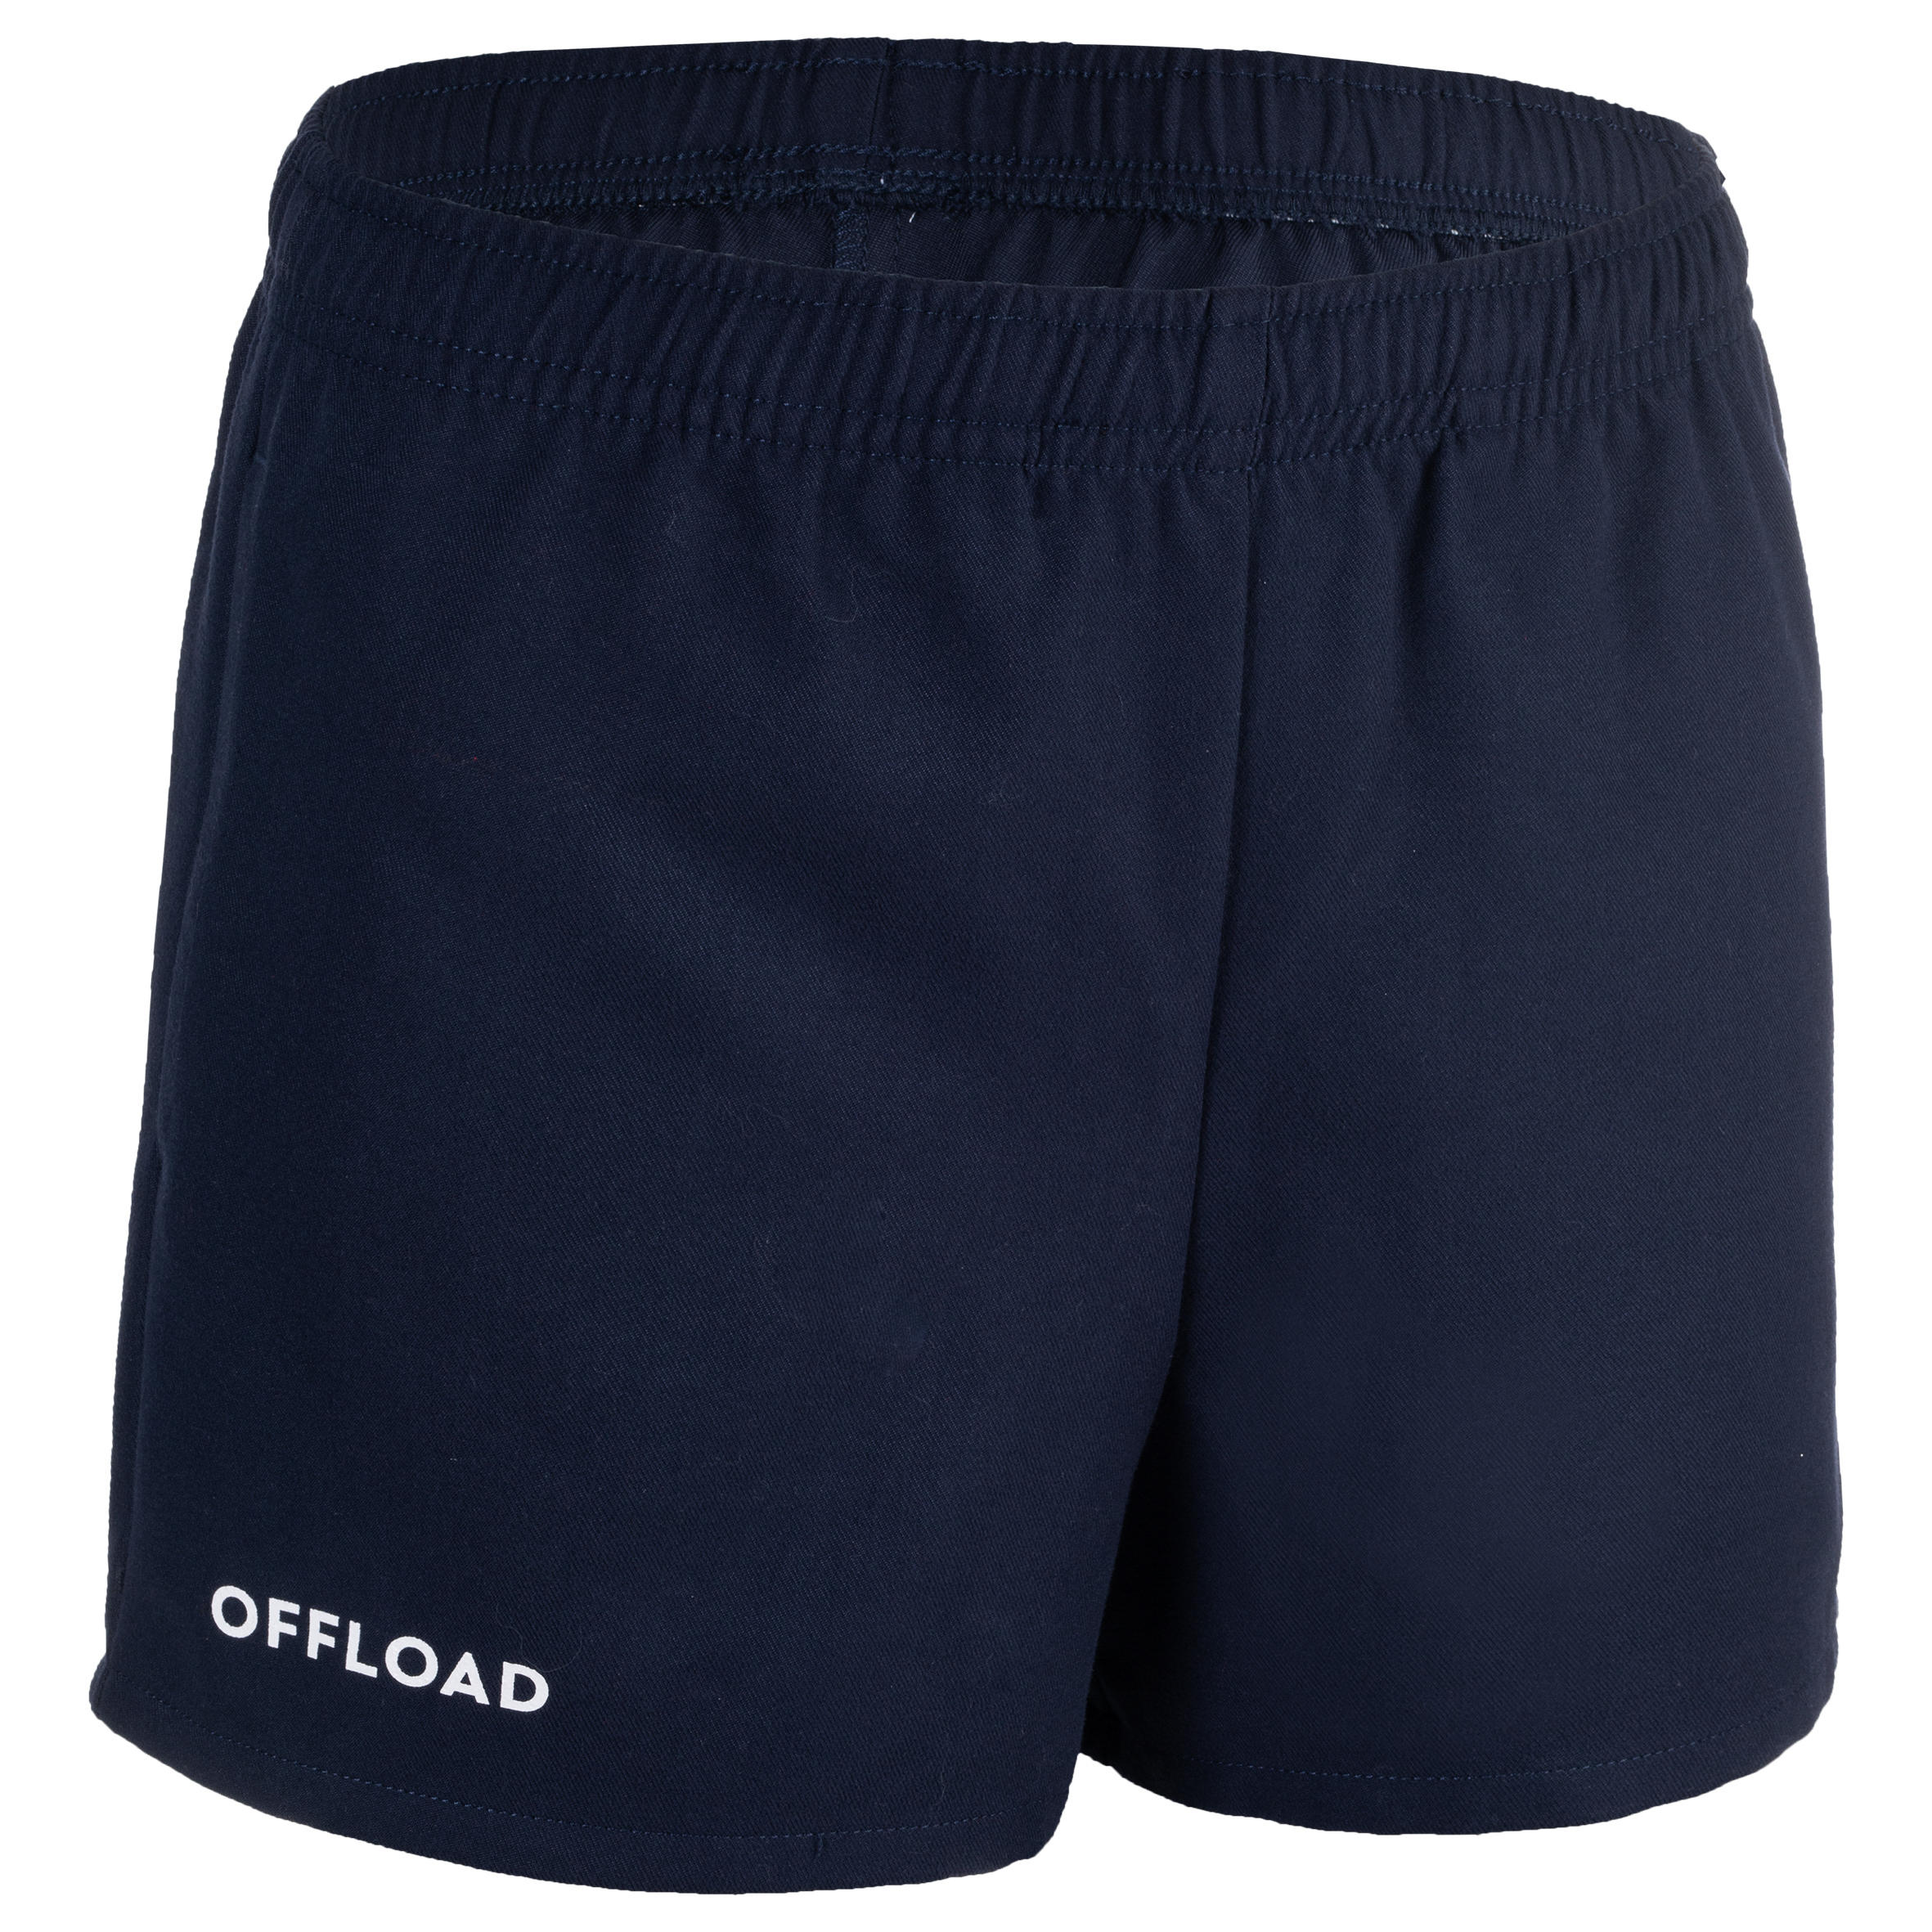 Kids' Rugby Shorts with Pockets R100 - Blue 1/7